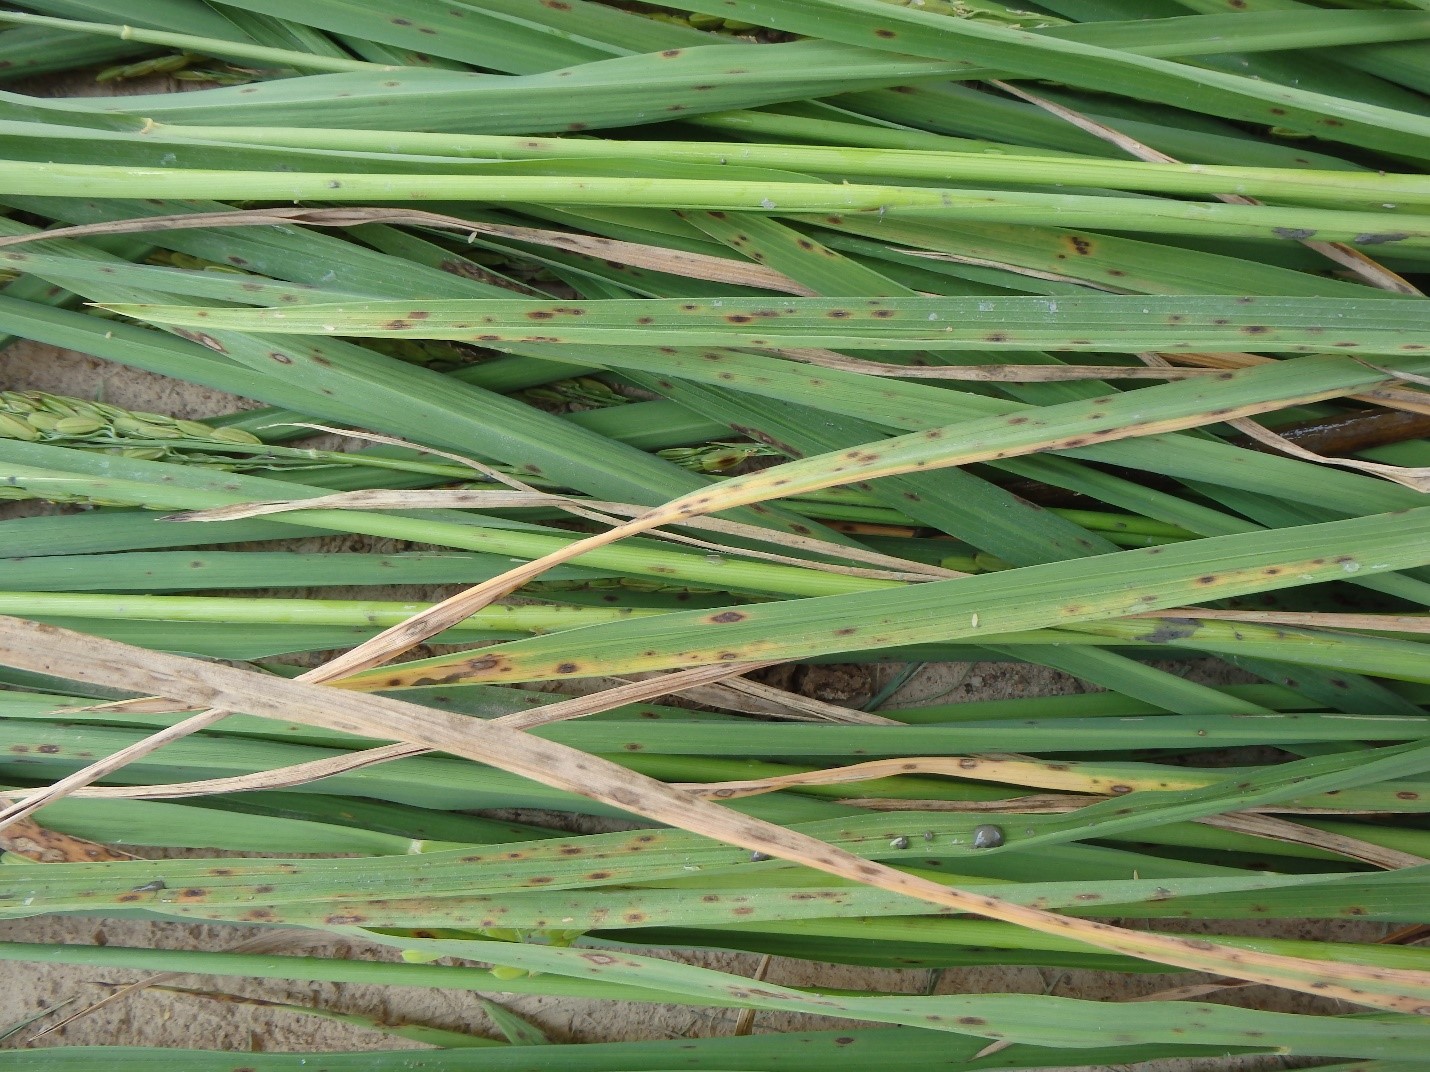 Rice leaves showing potassium (K) deficiency and resulting brown spot